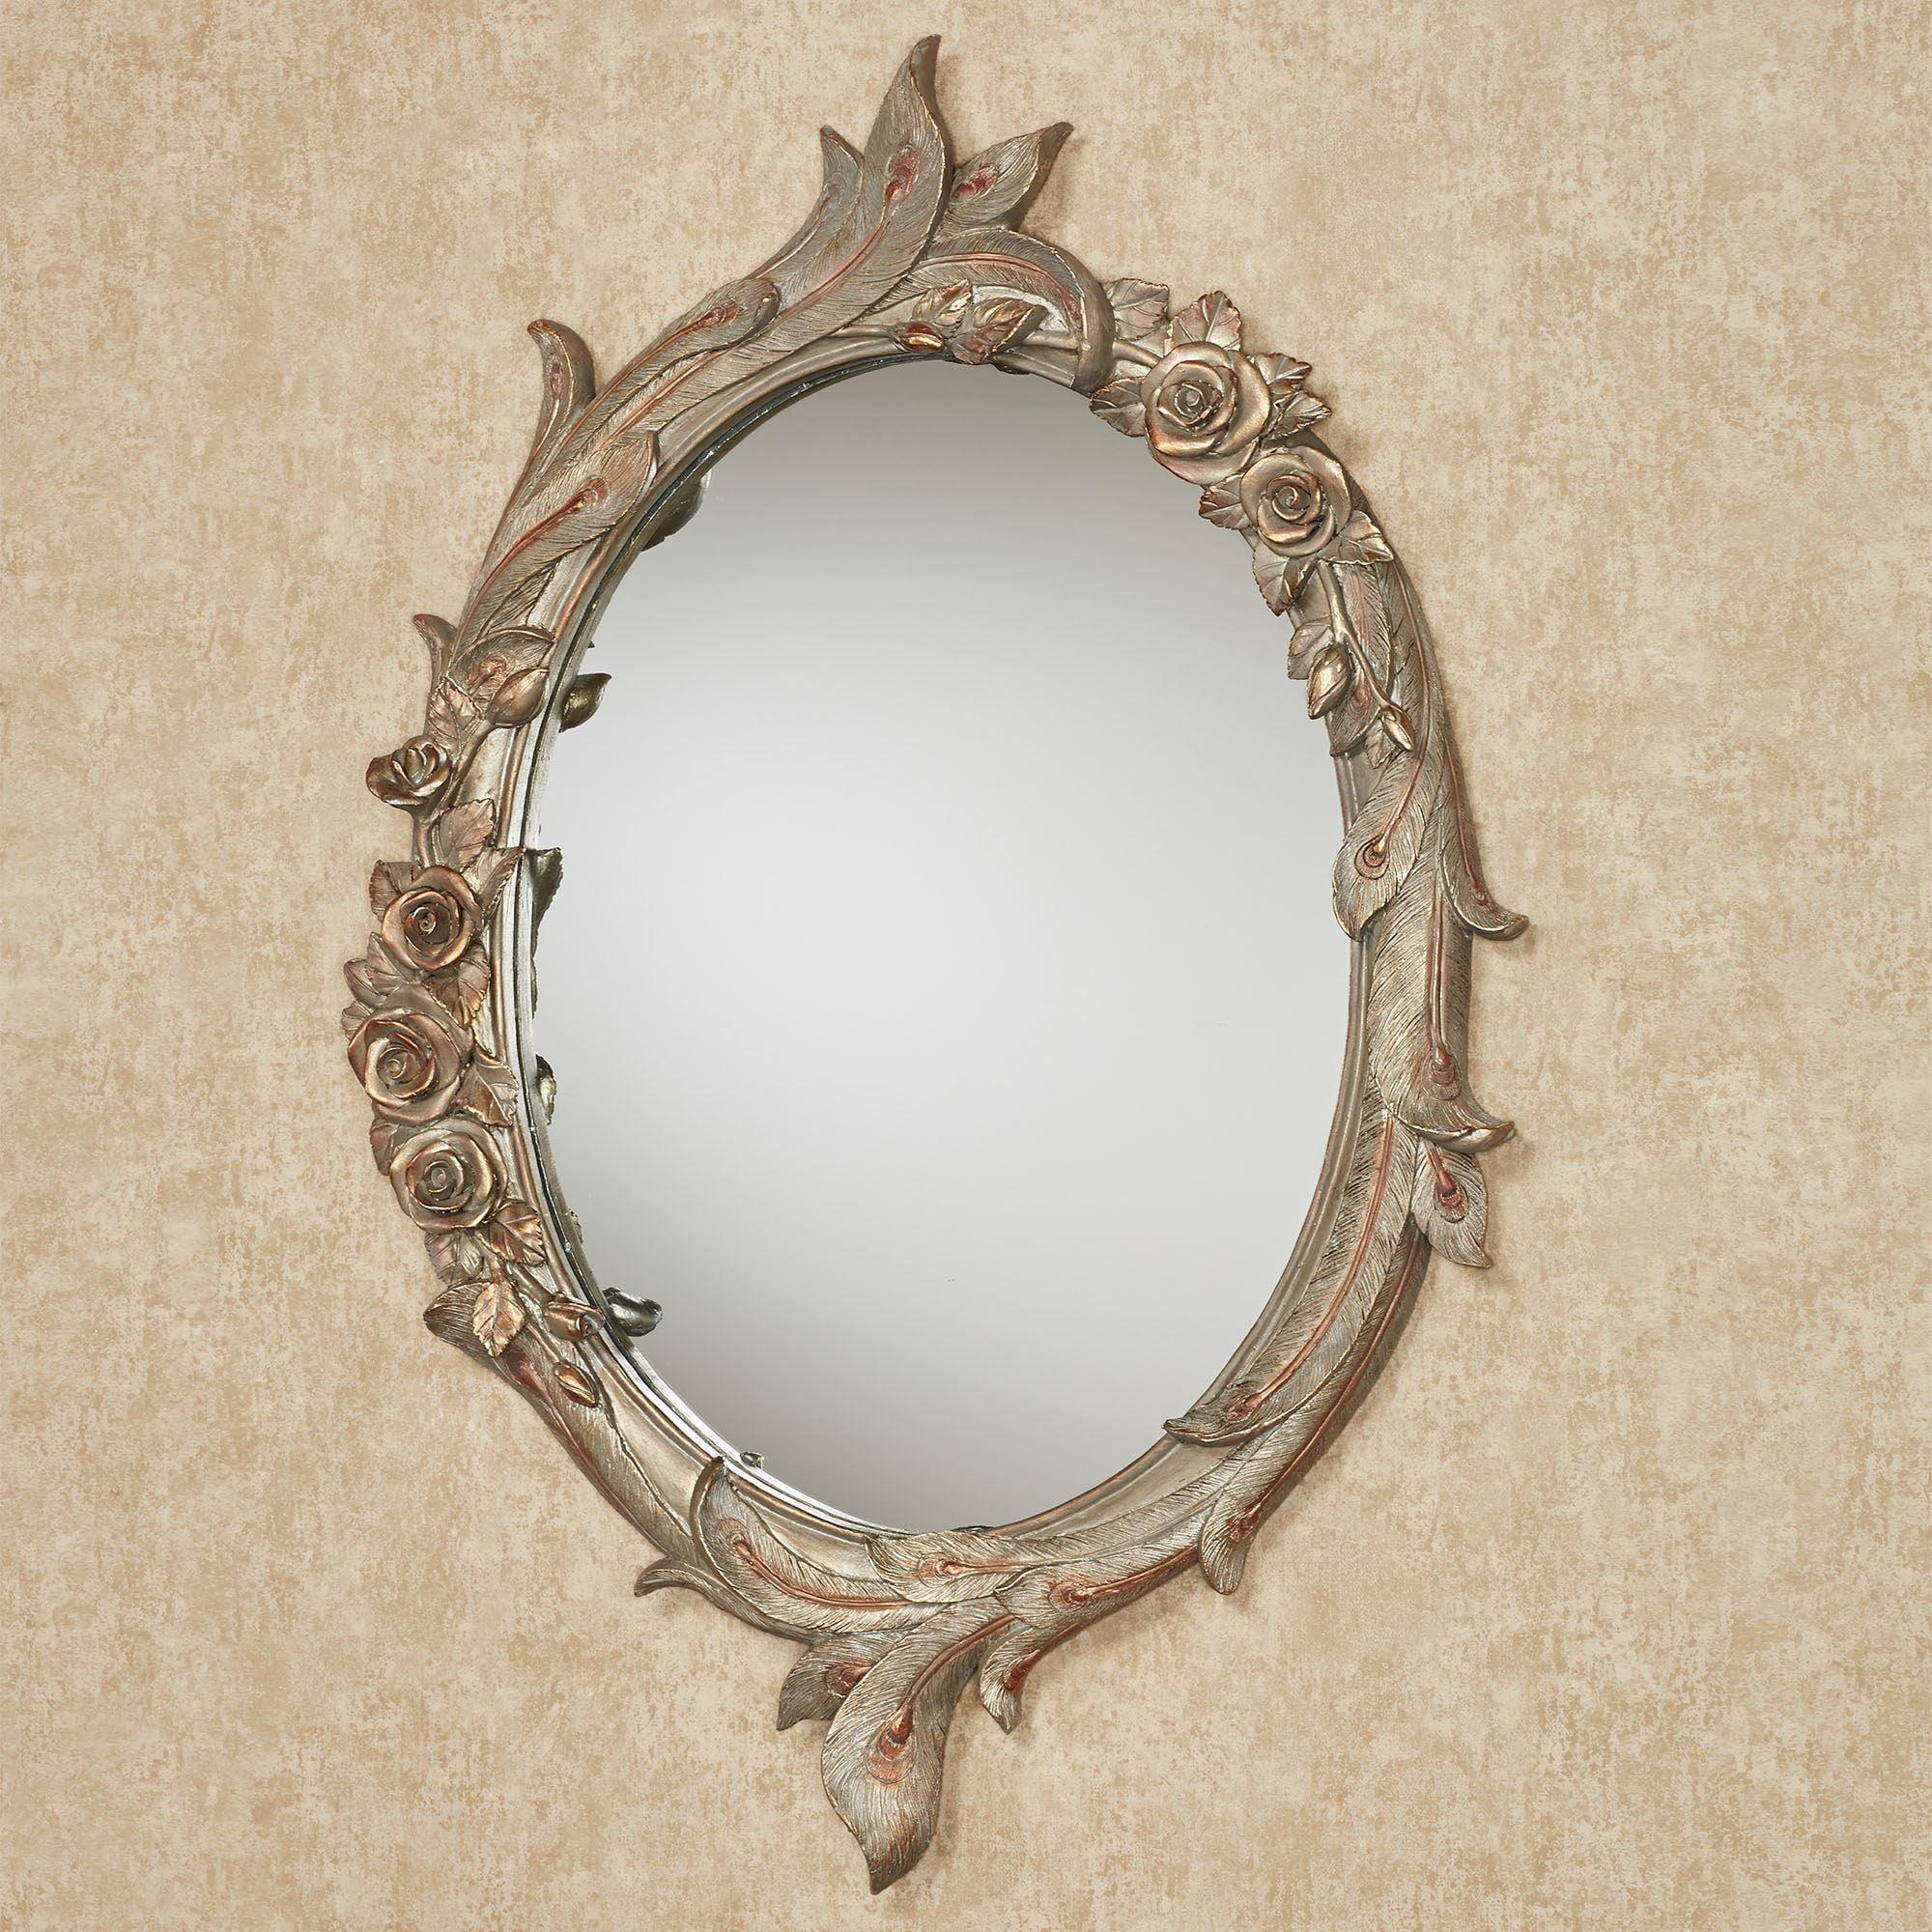 Elegance Peacock 20"x30" Oval Wall Mirror in Gold Finish